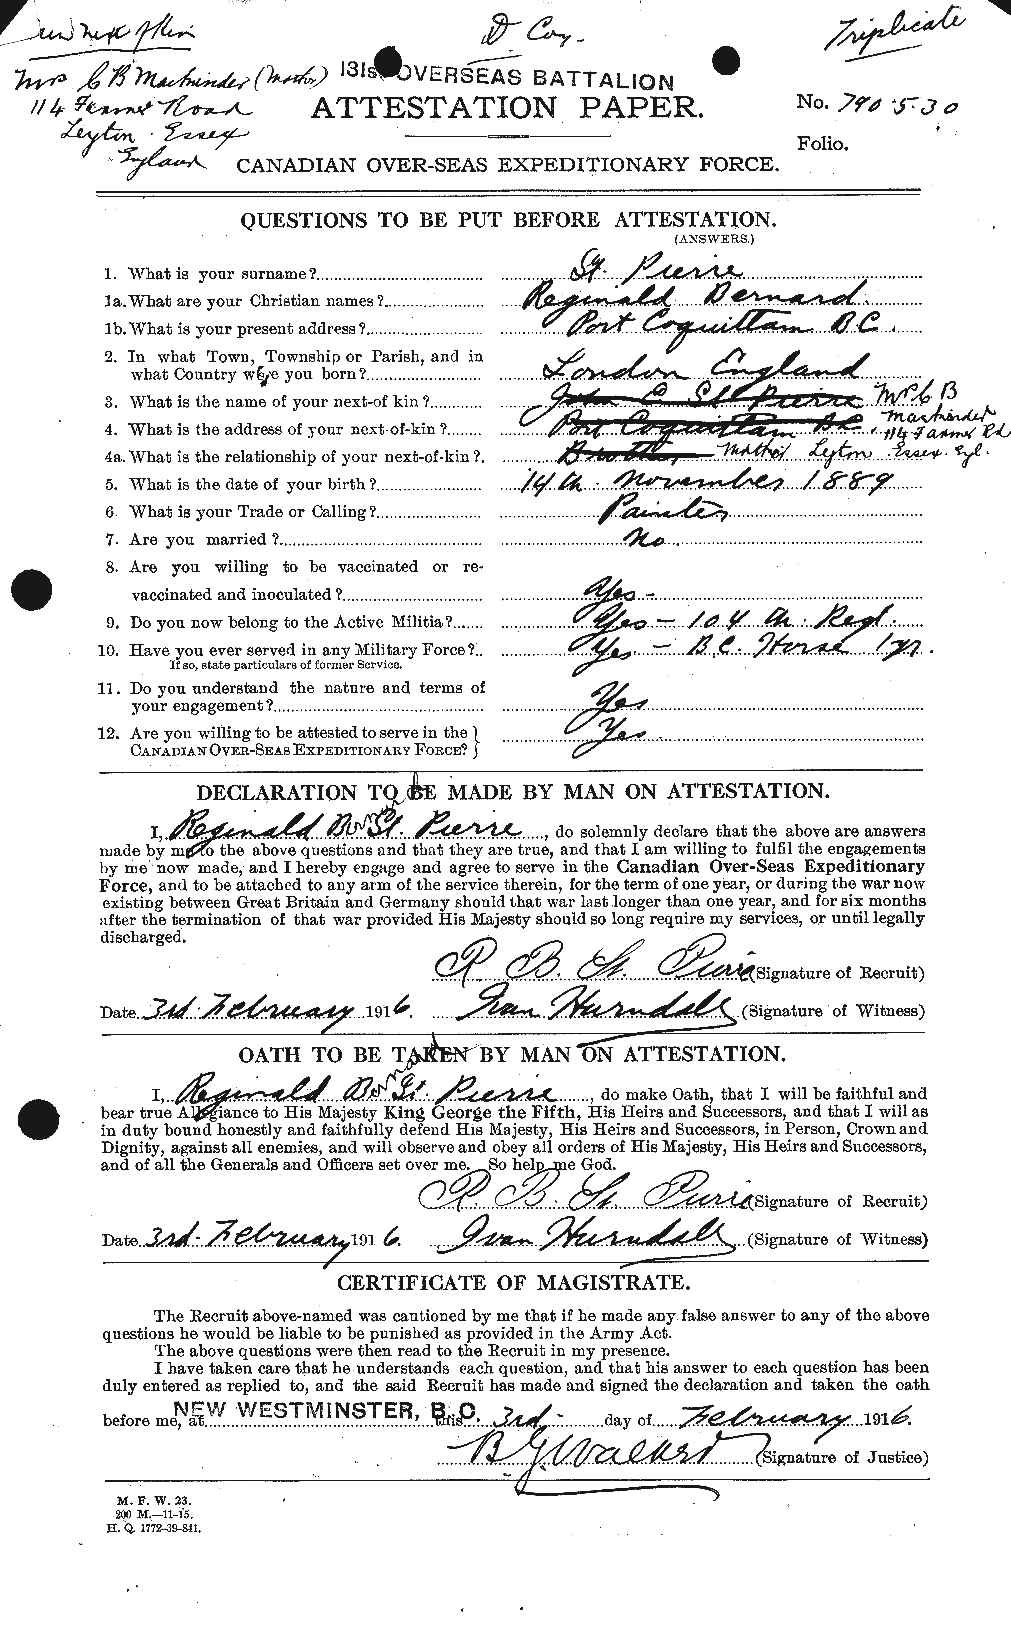 Personnel Records of the First World War - CEF 077567a